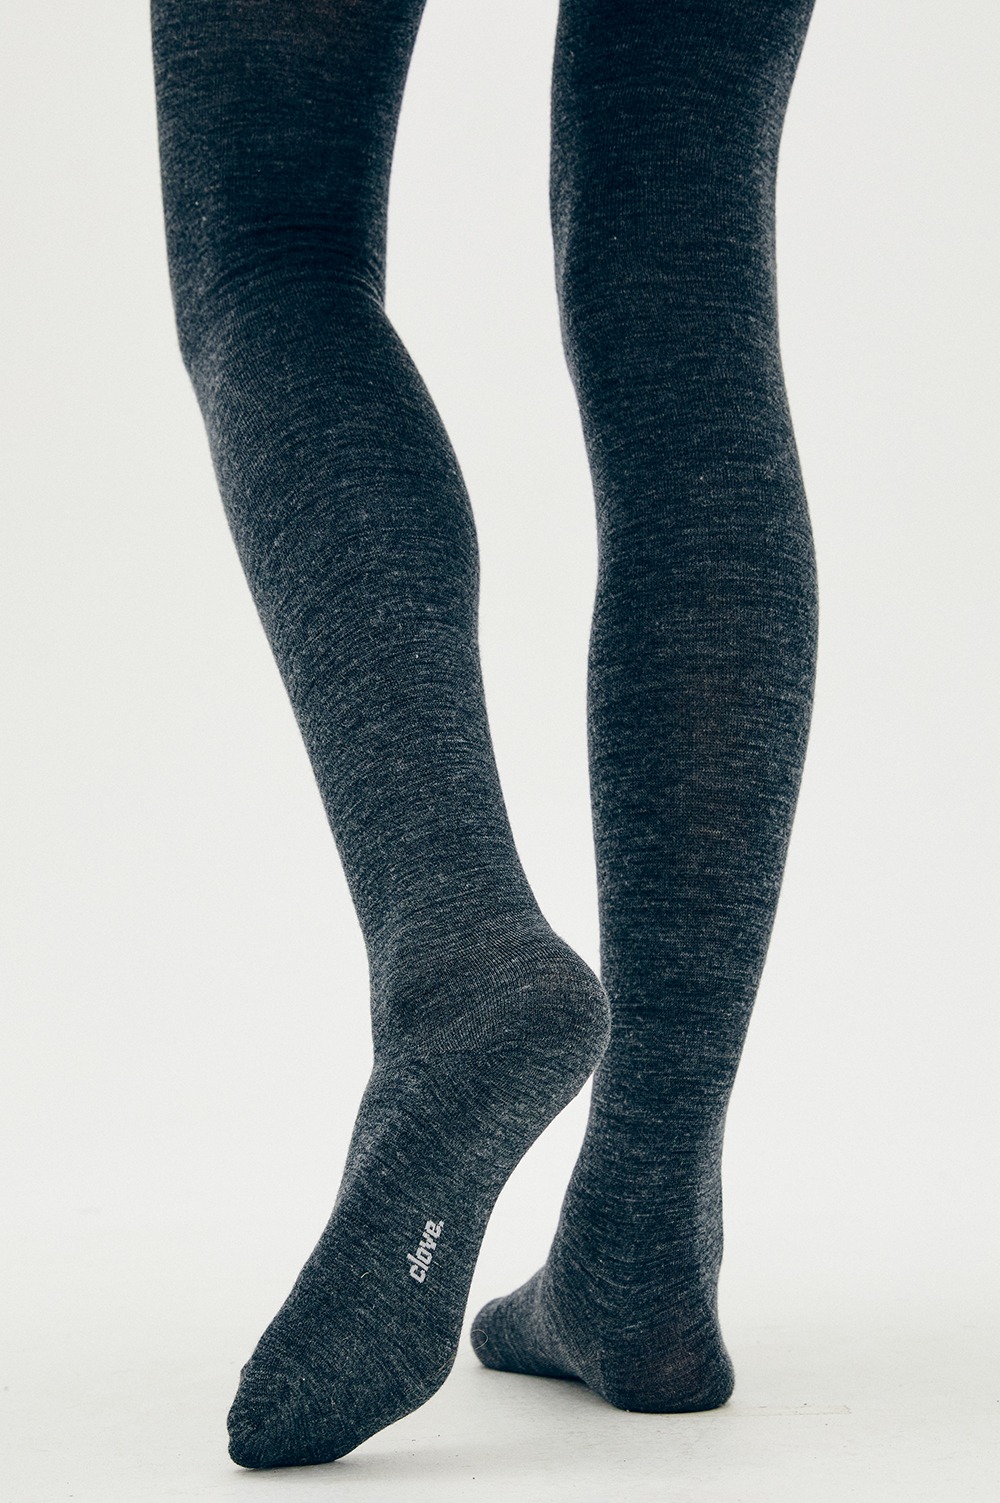 clove - [22FW clove] Wool Blended Tights (Charcoal)